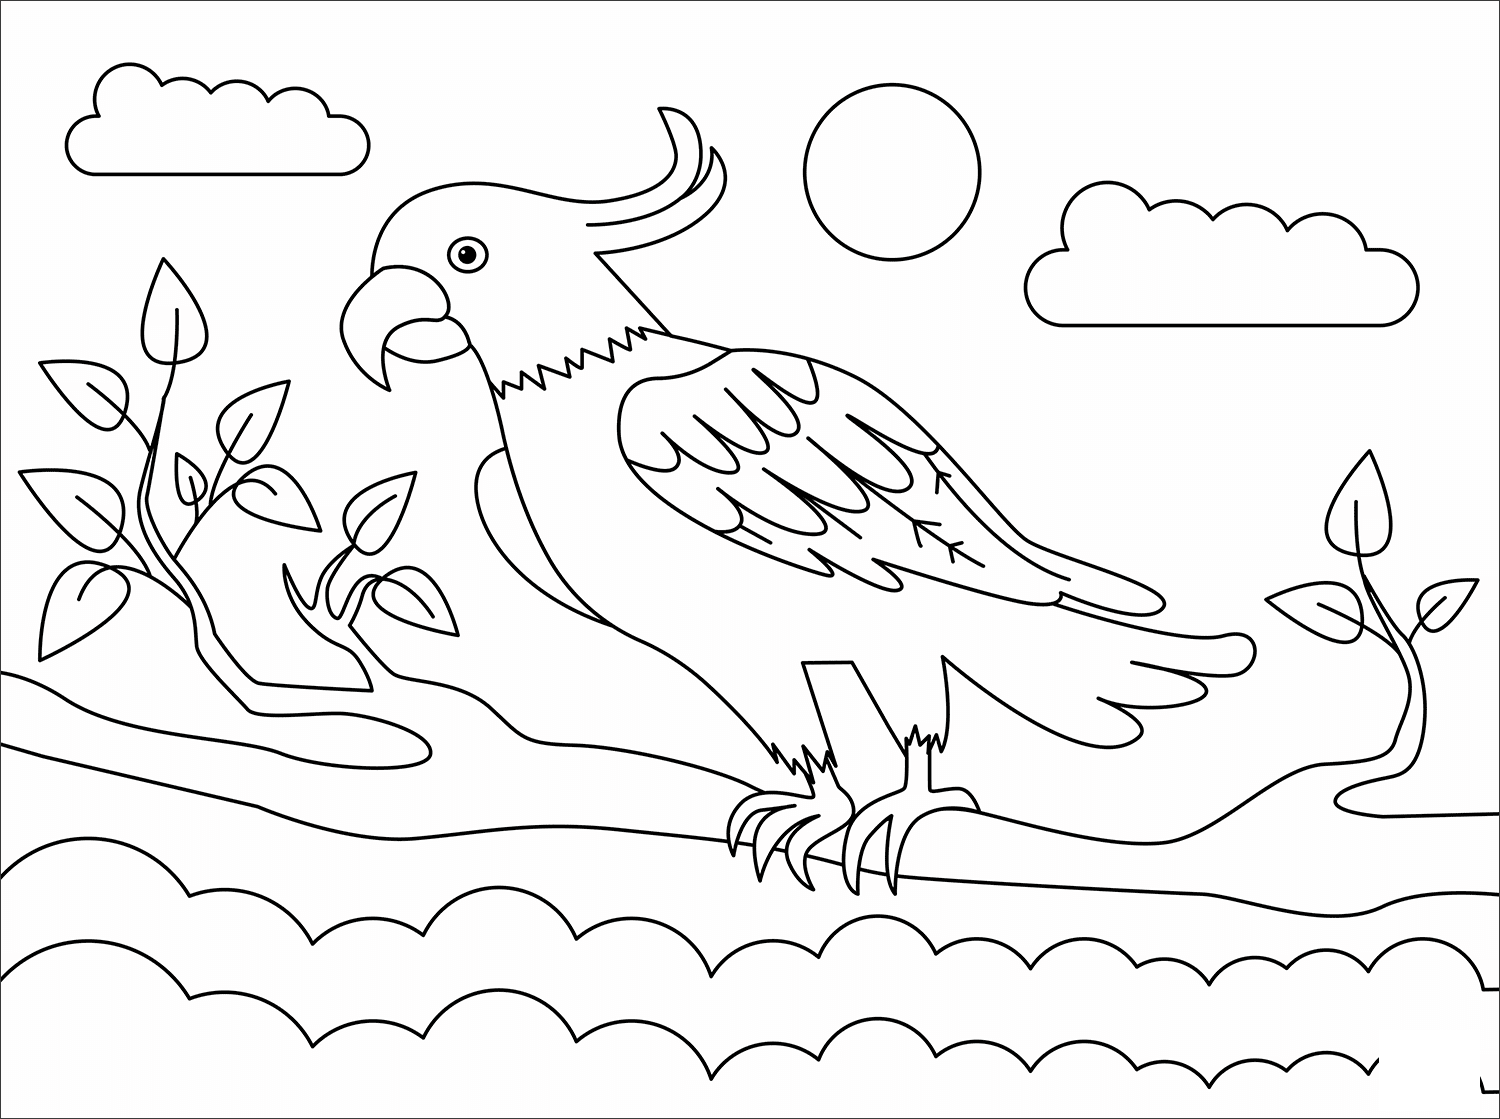 Cockatoo Animal Simple Coloring Page